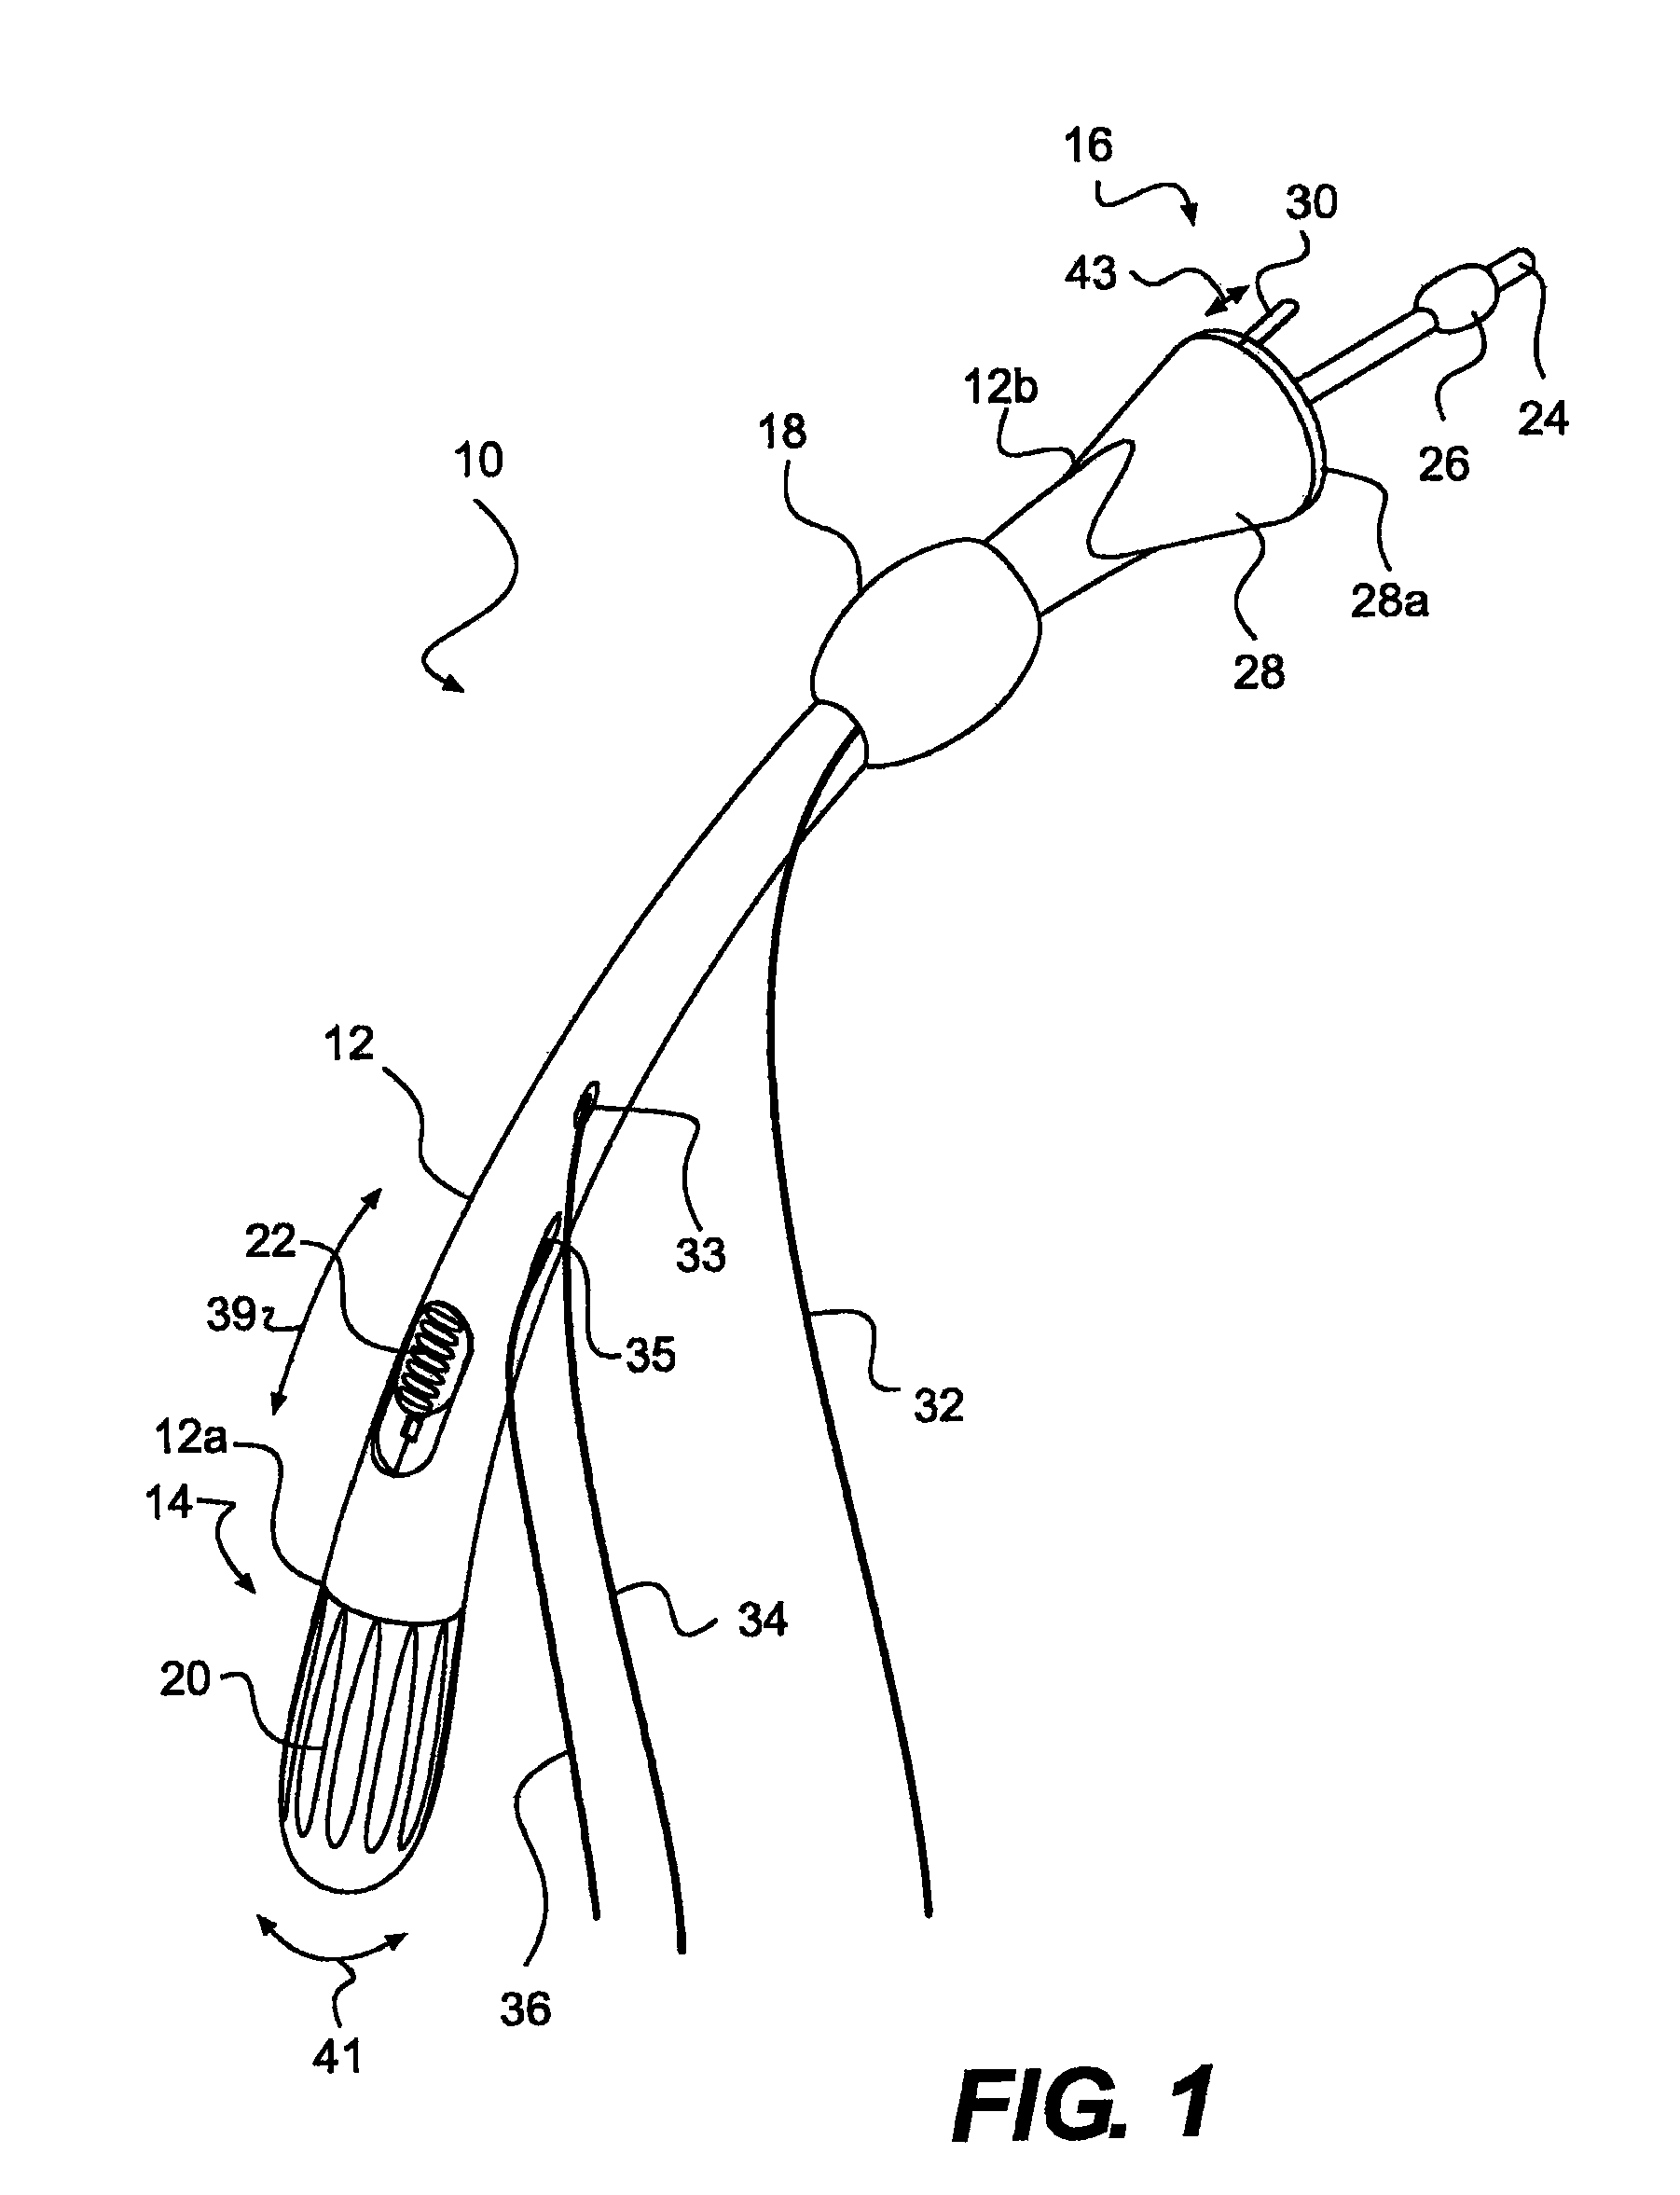 Apparatus for treating a portion of a reproductive system and related methods of use